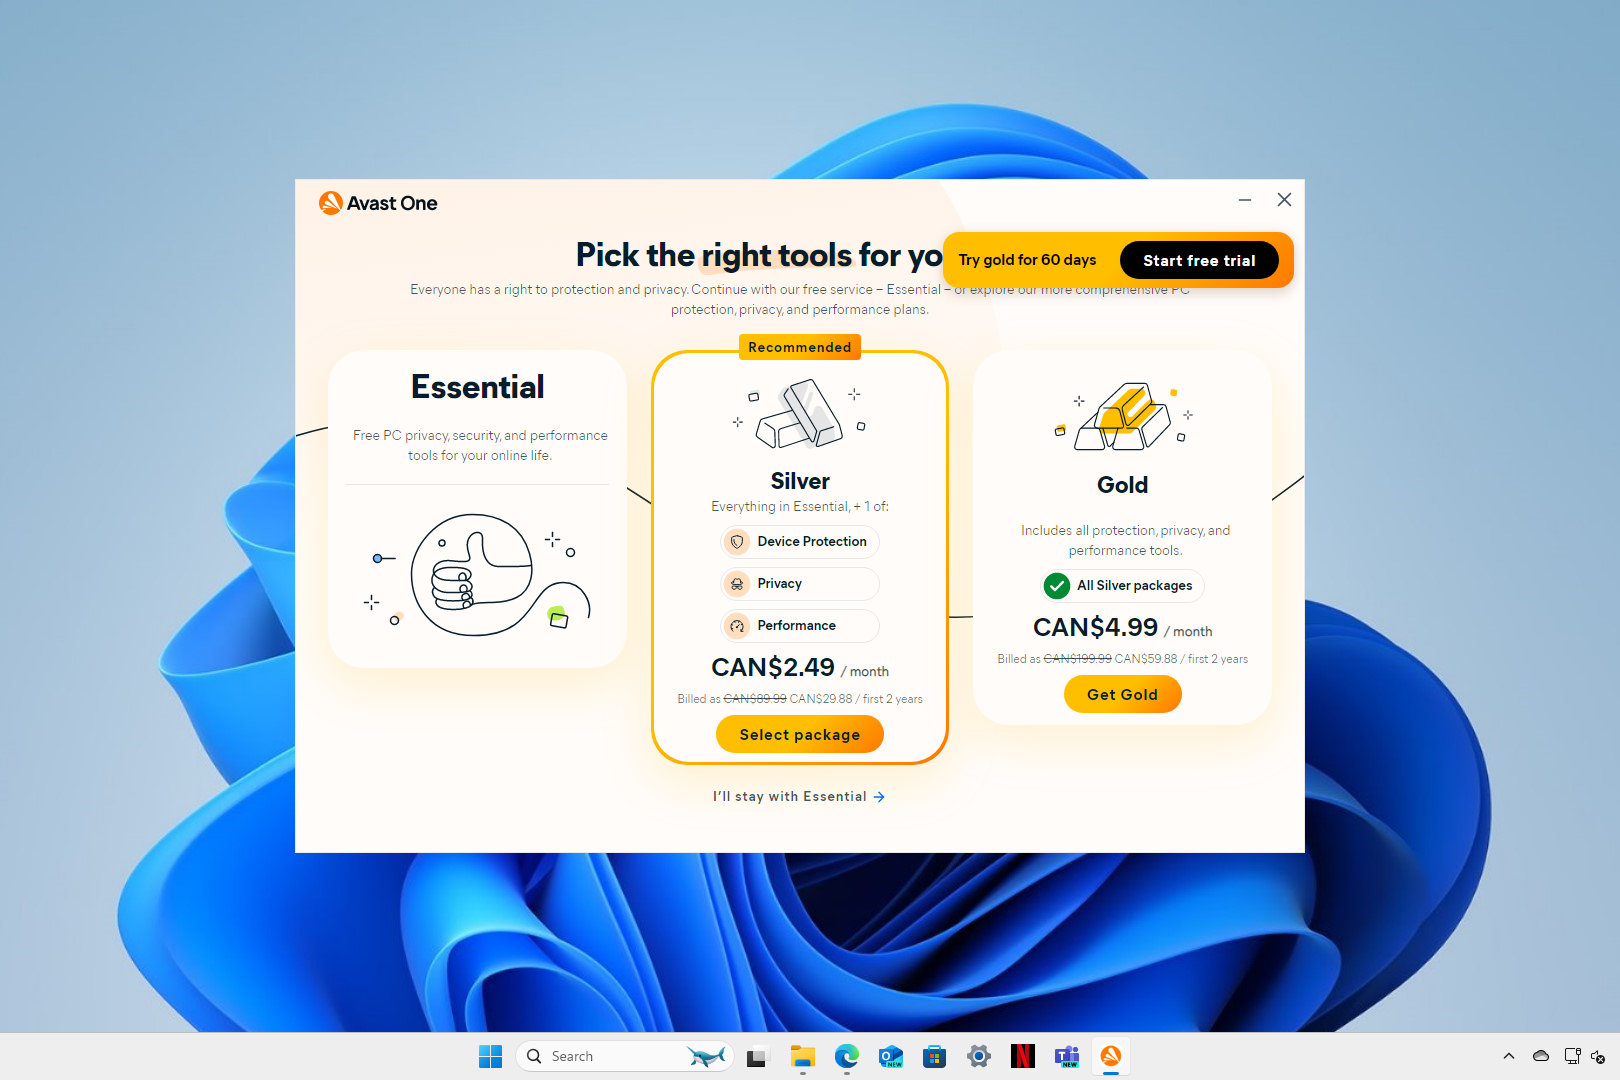 Avast offers generous 60-day free trials.